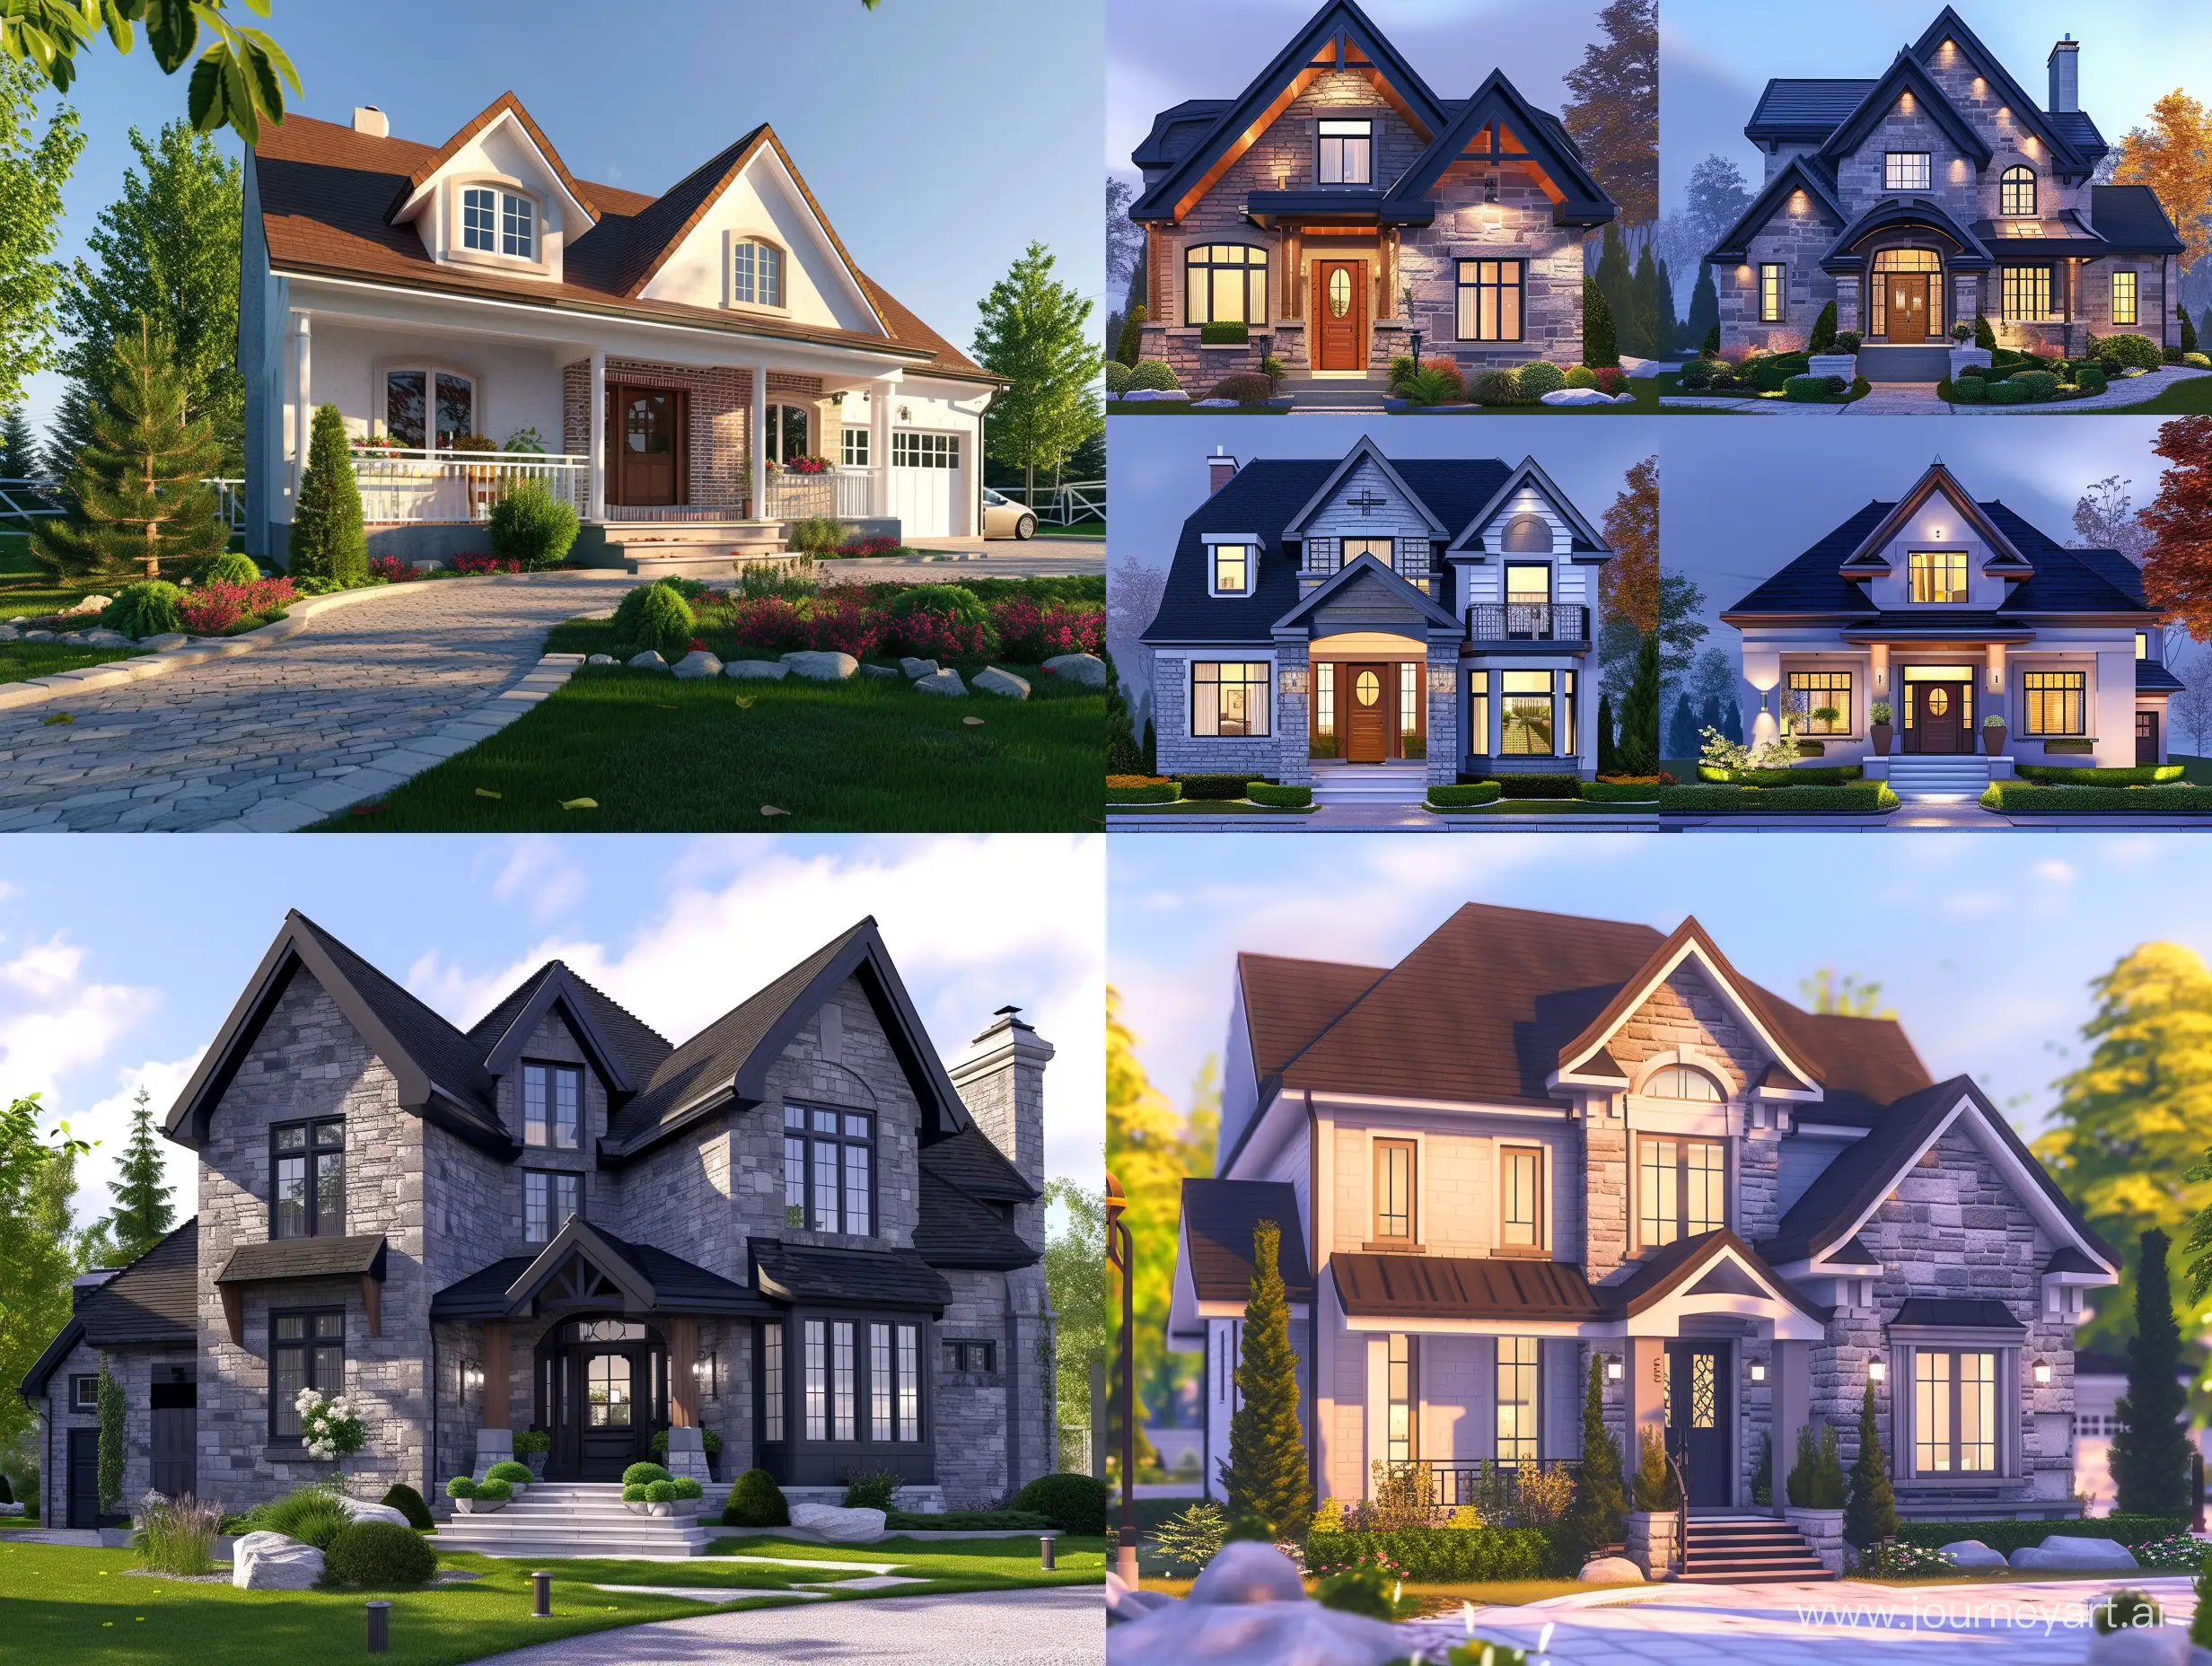 Authentic-Canadian-Lifestyle-Complete-Set-of-Houses-in-Greater-Montreal-Area